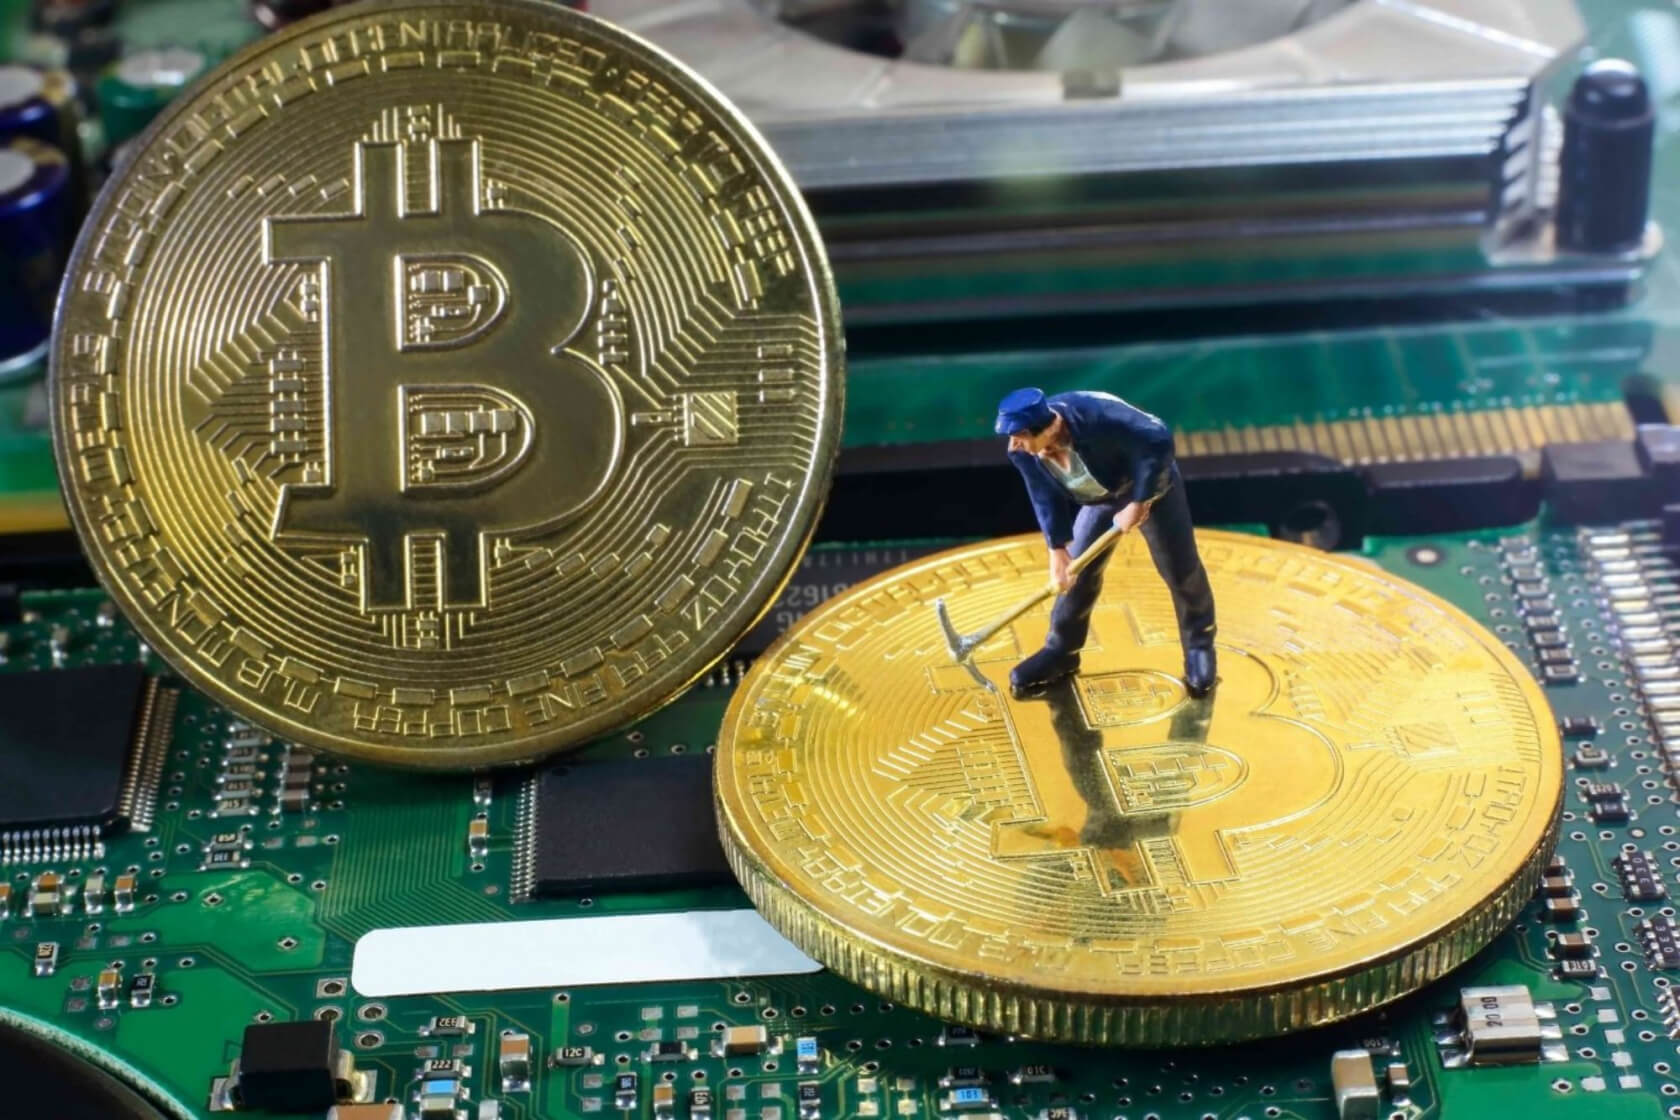 Cryptominers unable to repay millions in loans are handing over their mining rigs instead